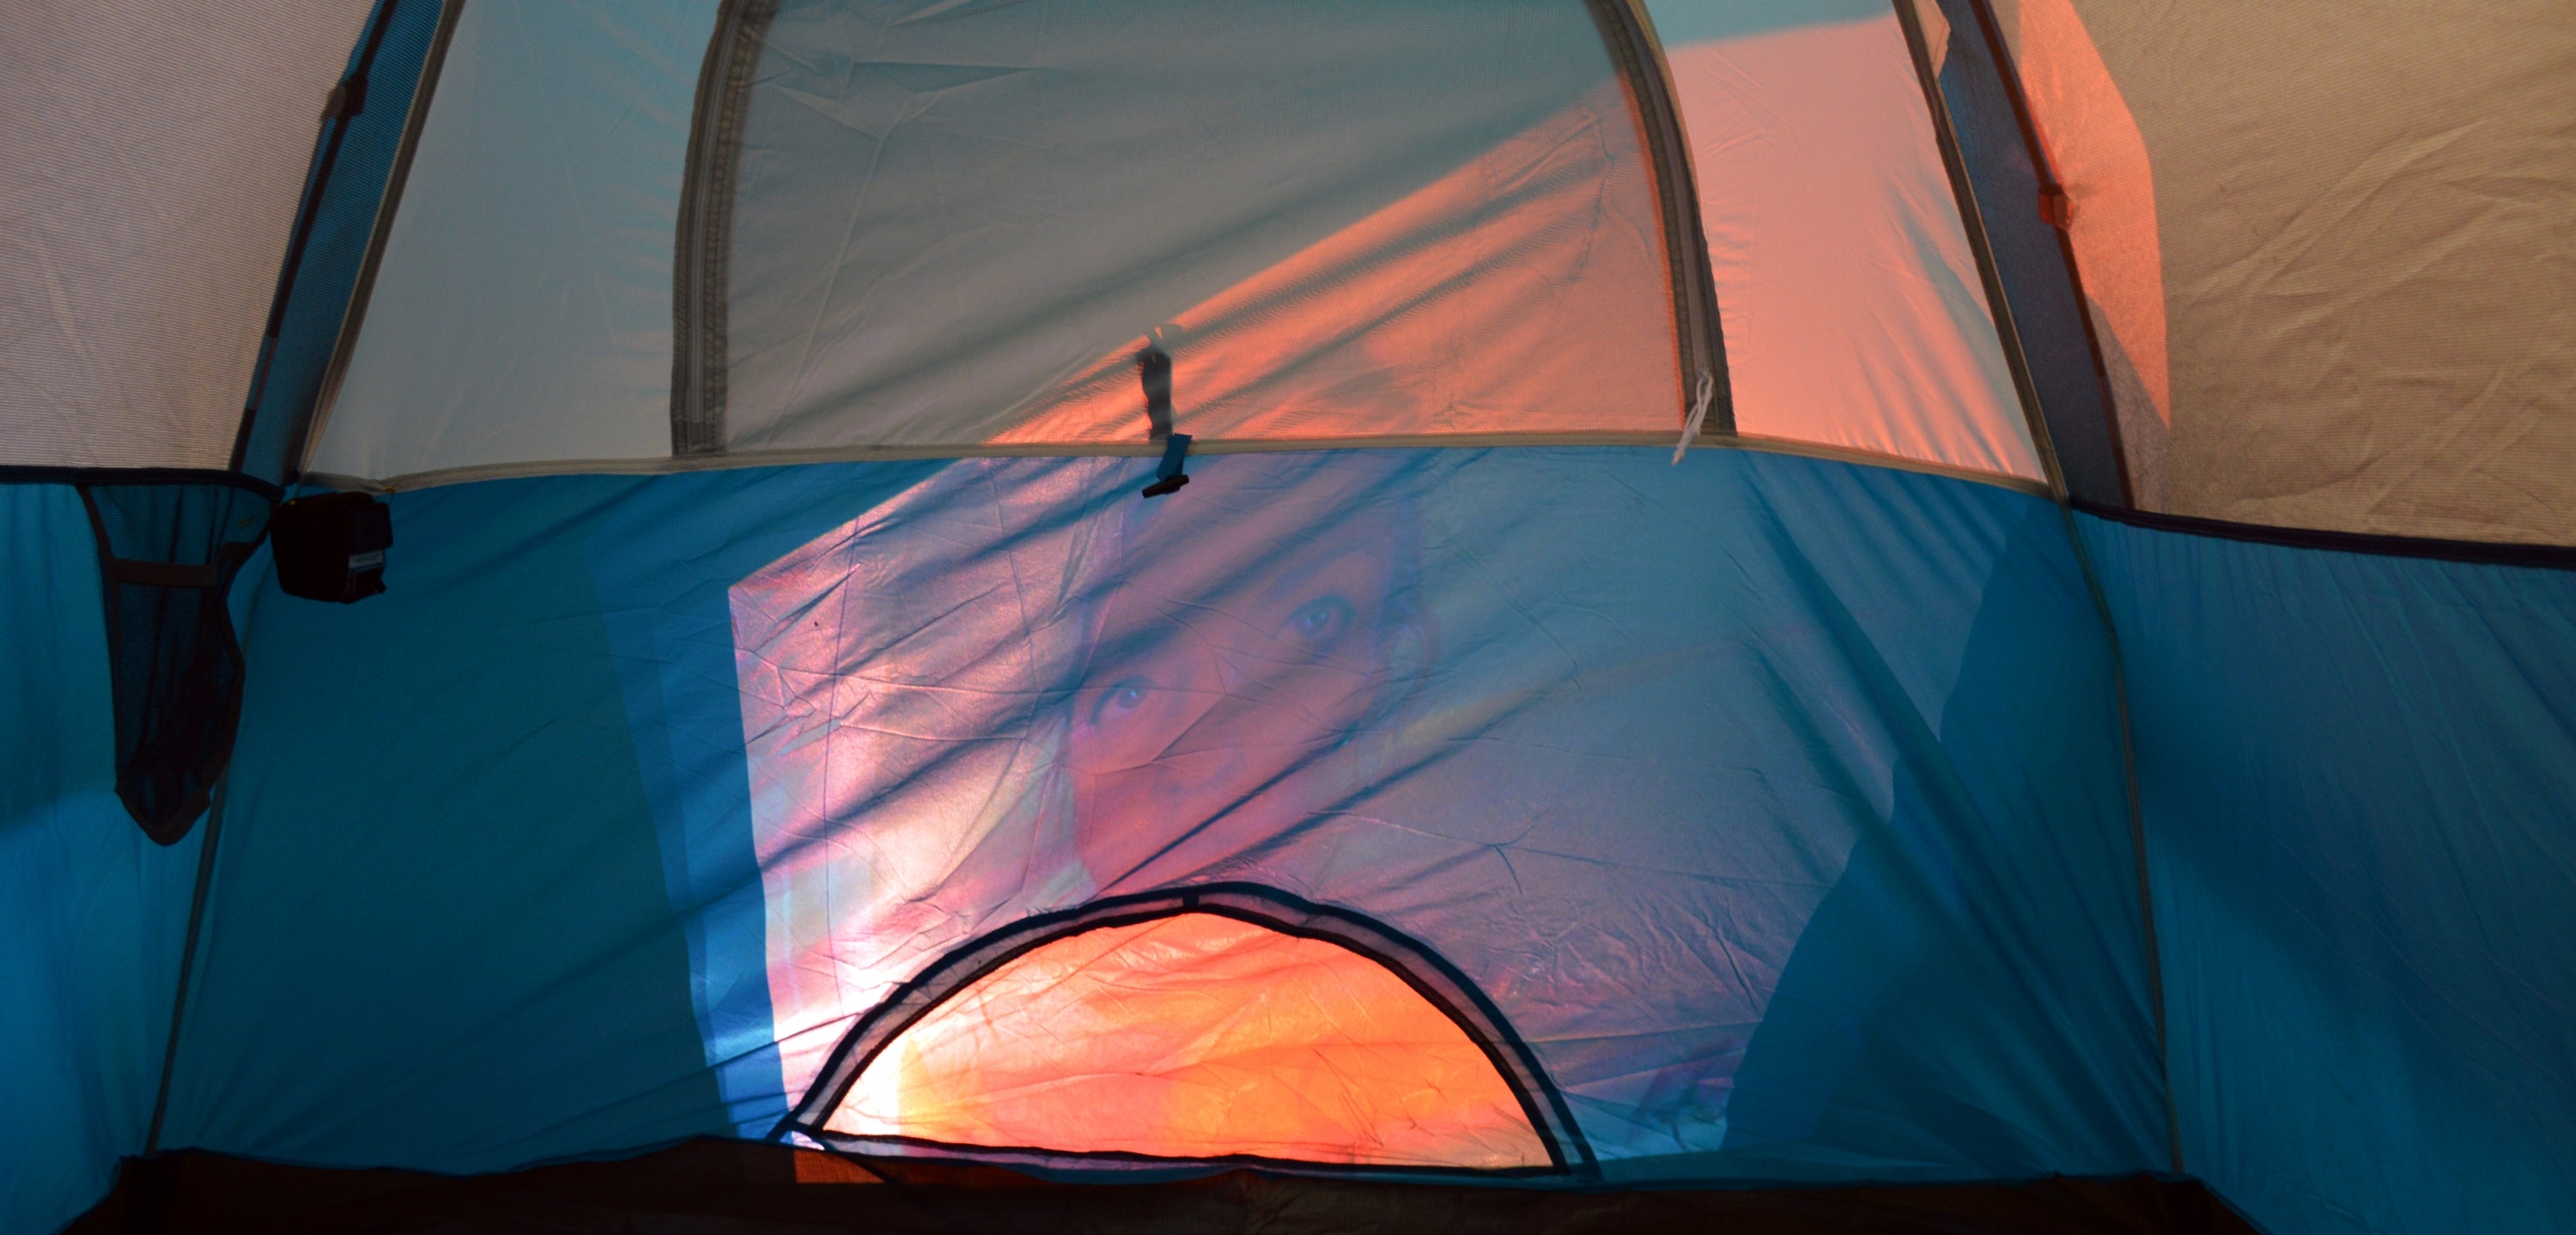 Video plays in tent